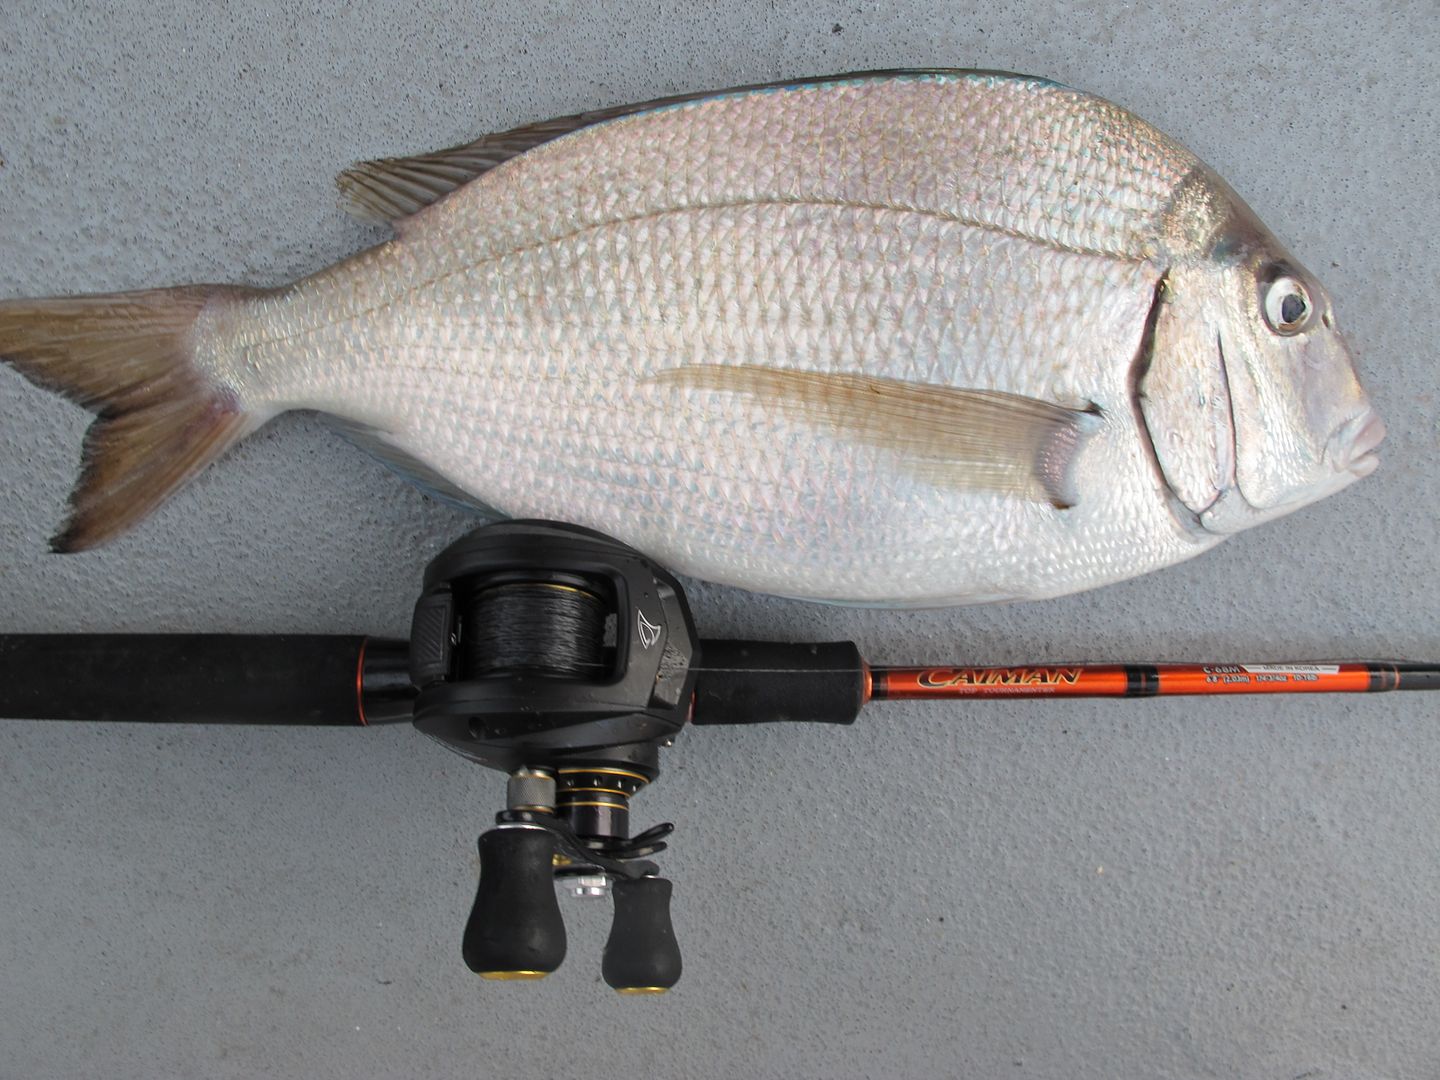 Jumbo porgy fishing on the Celtic Quest - Saltwater Fishing Discussion 